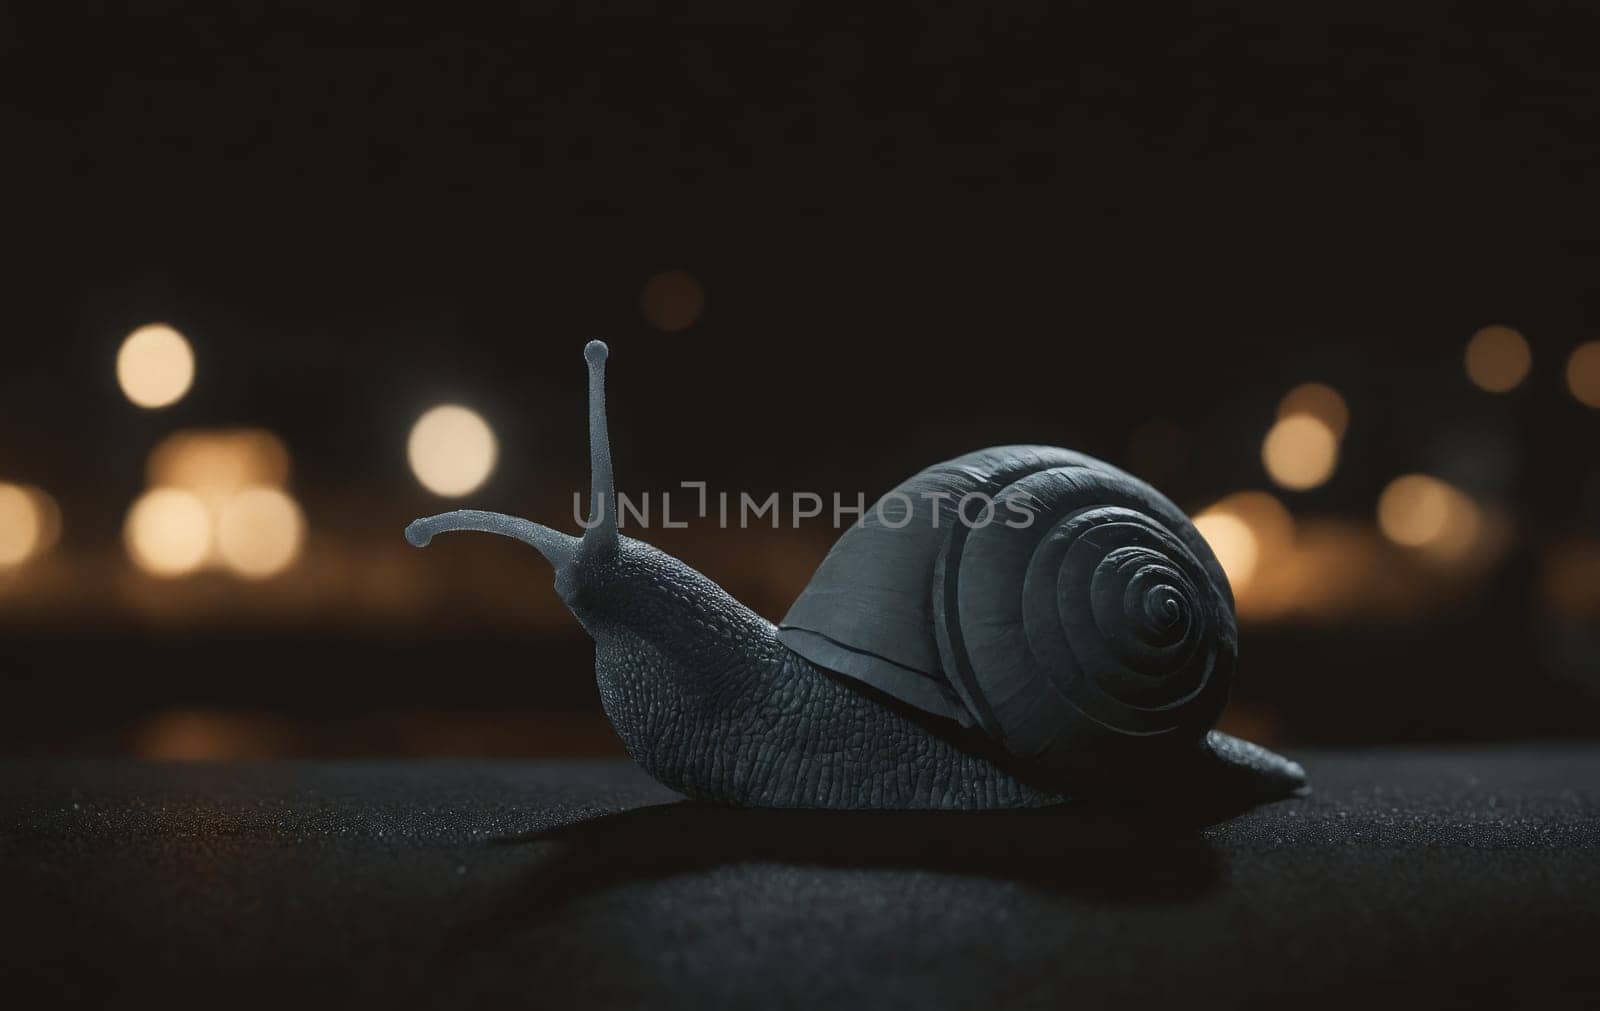 A terrestrial snail from the Lymnaeidae family is slowly moving across a table covered in grass and plants in the dark, its spiral shell shining faintly